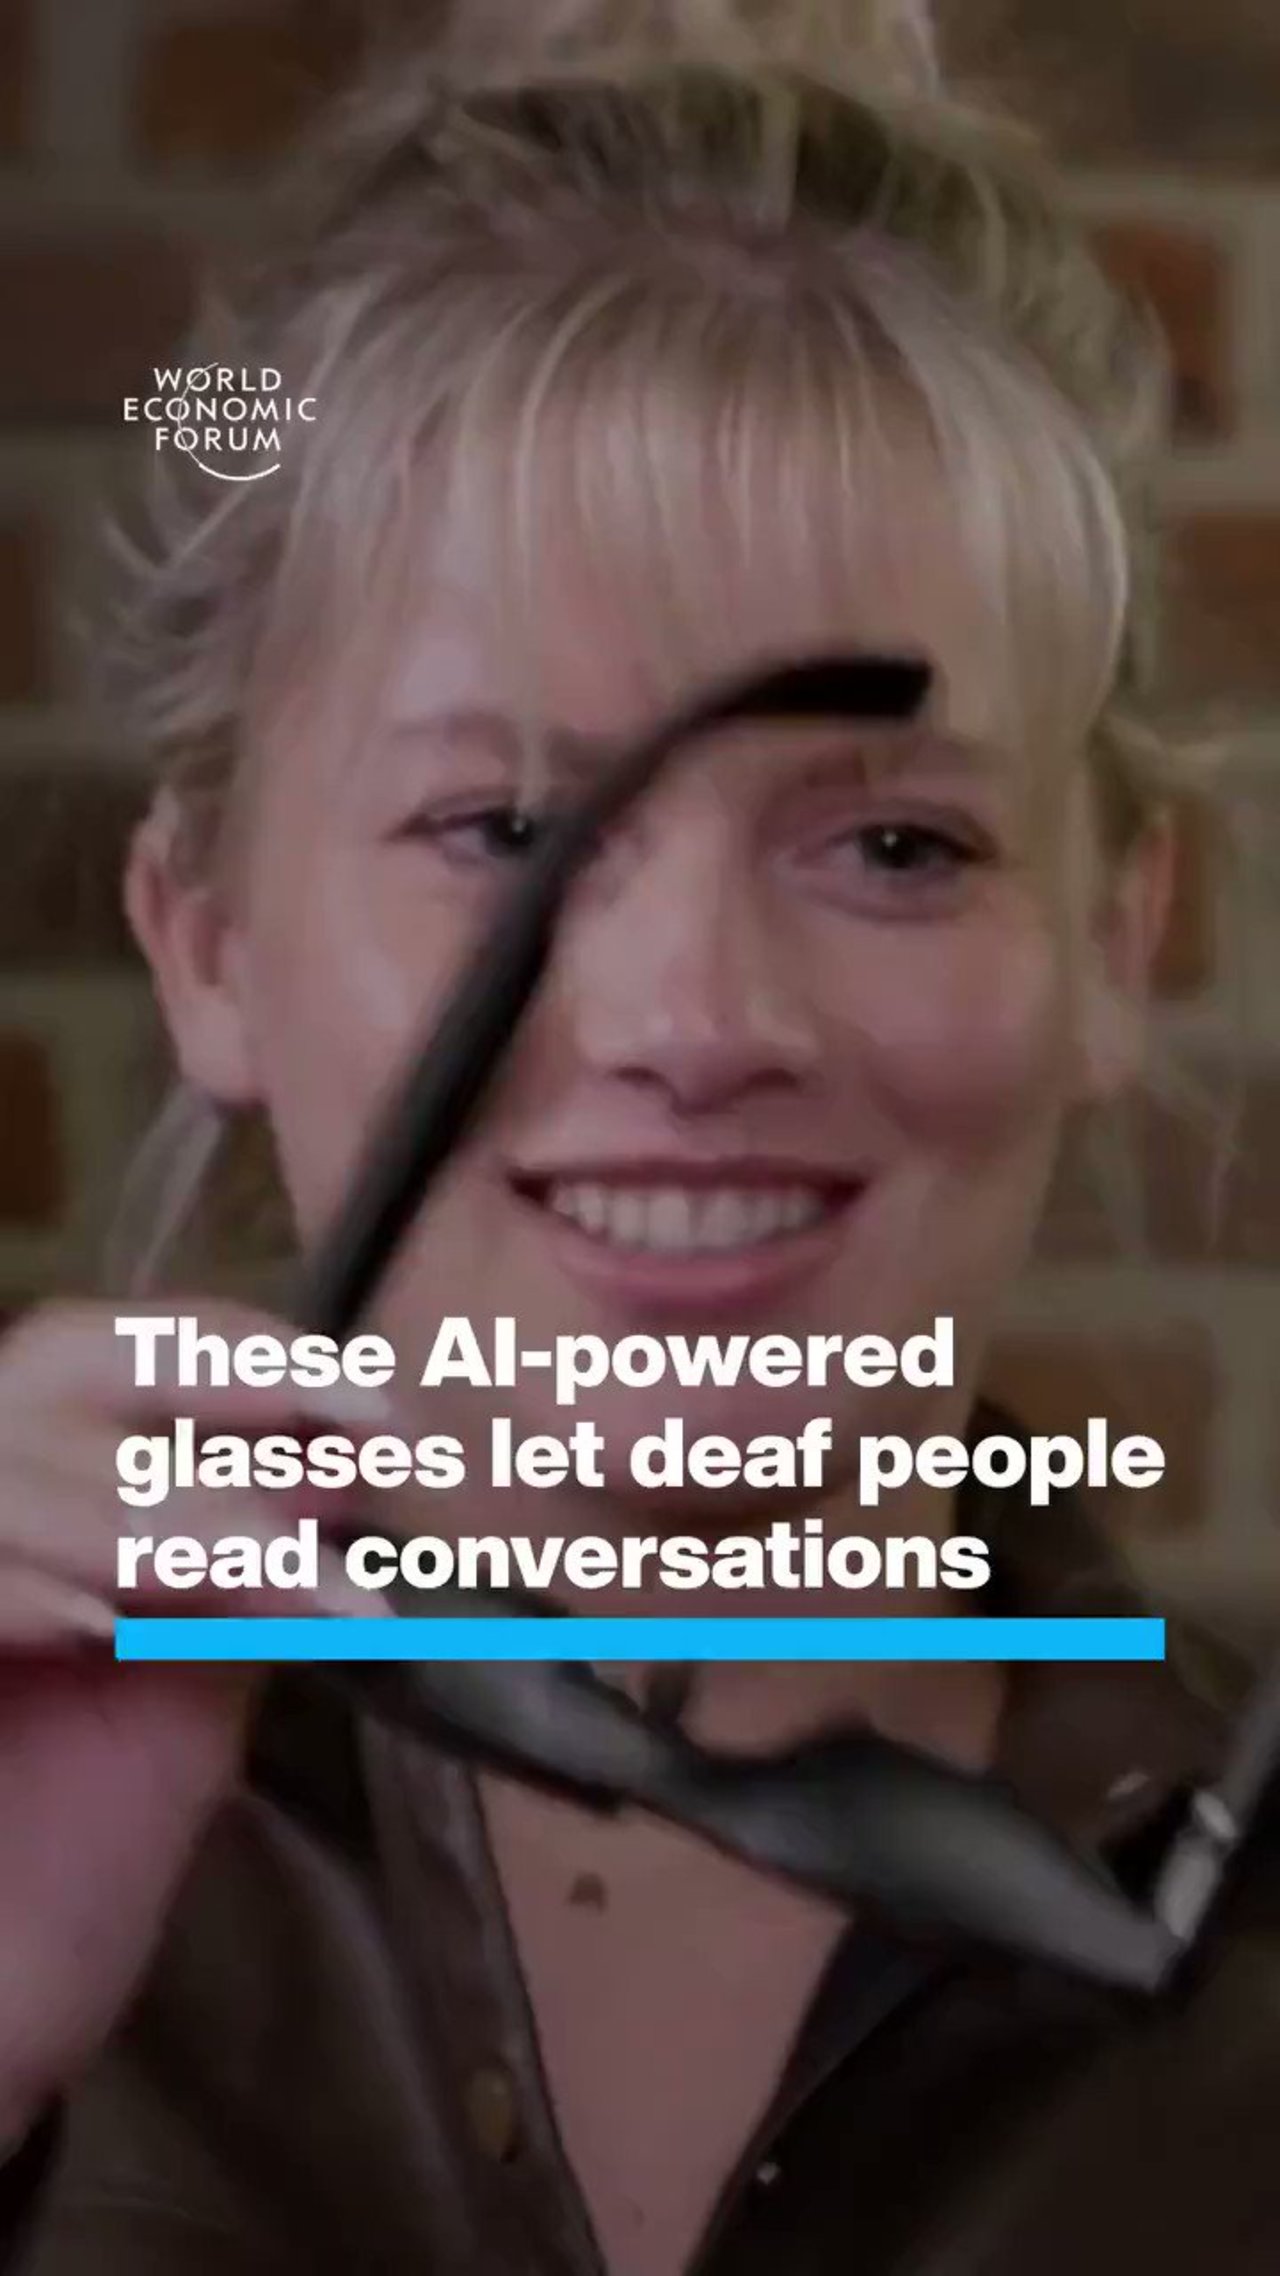 These #AI-powered glasses let deaf people read conversations by @wef #IoT #ArtificialIntelligence #InternetofThings #Innovation #FutureOfWork #Innovation  cc: @maxjcm @ronald_vanloon @pascal_bornet https://t.co/w7lTY7blPG